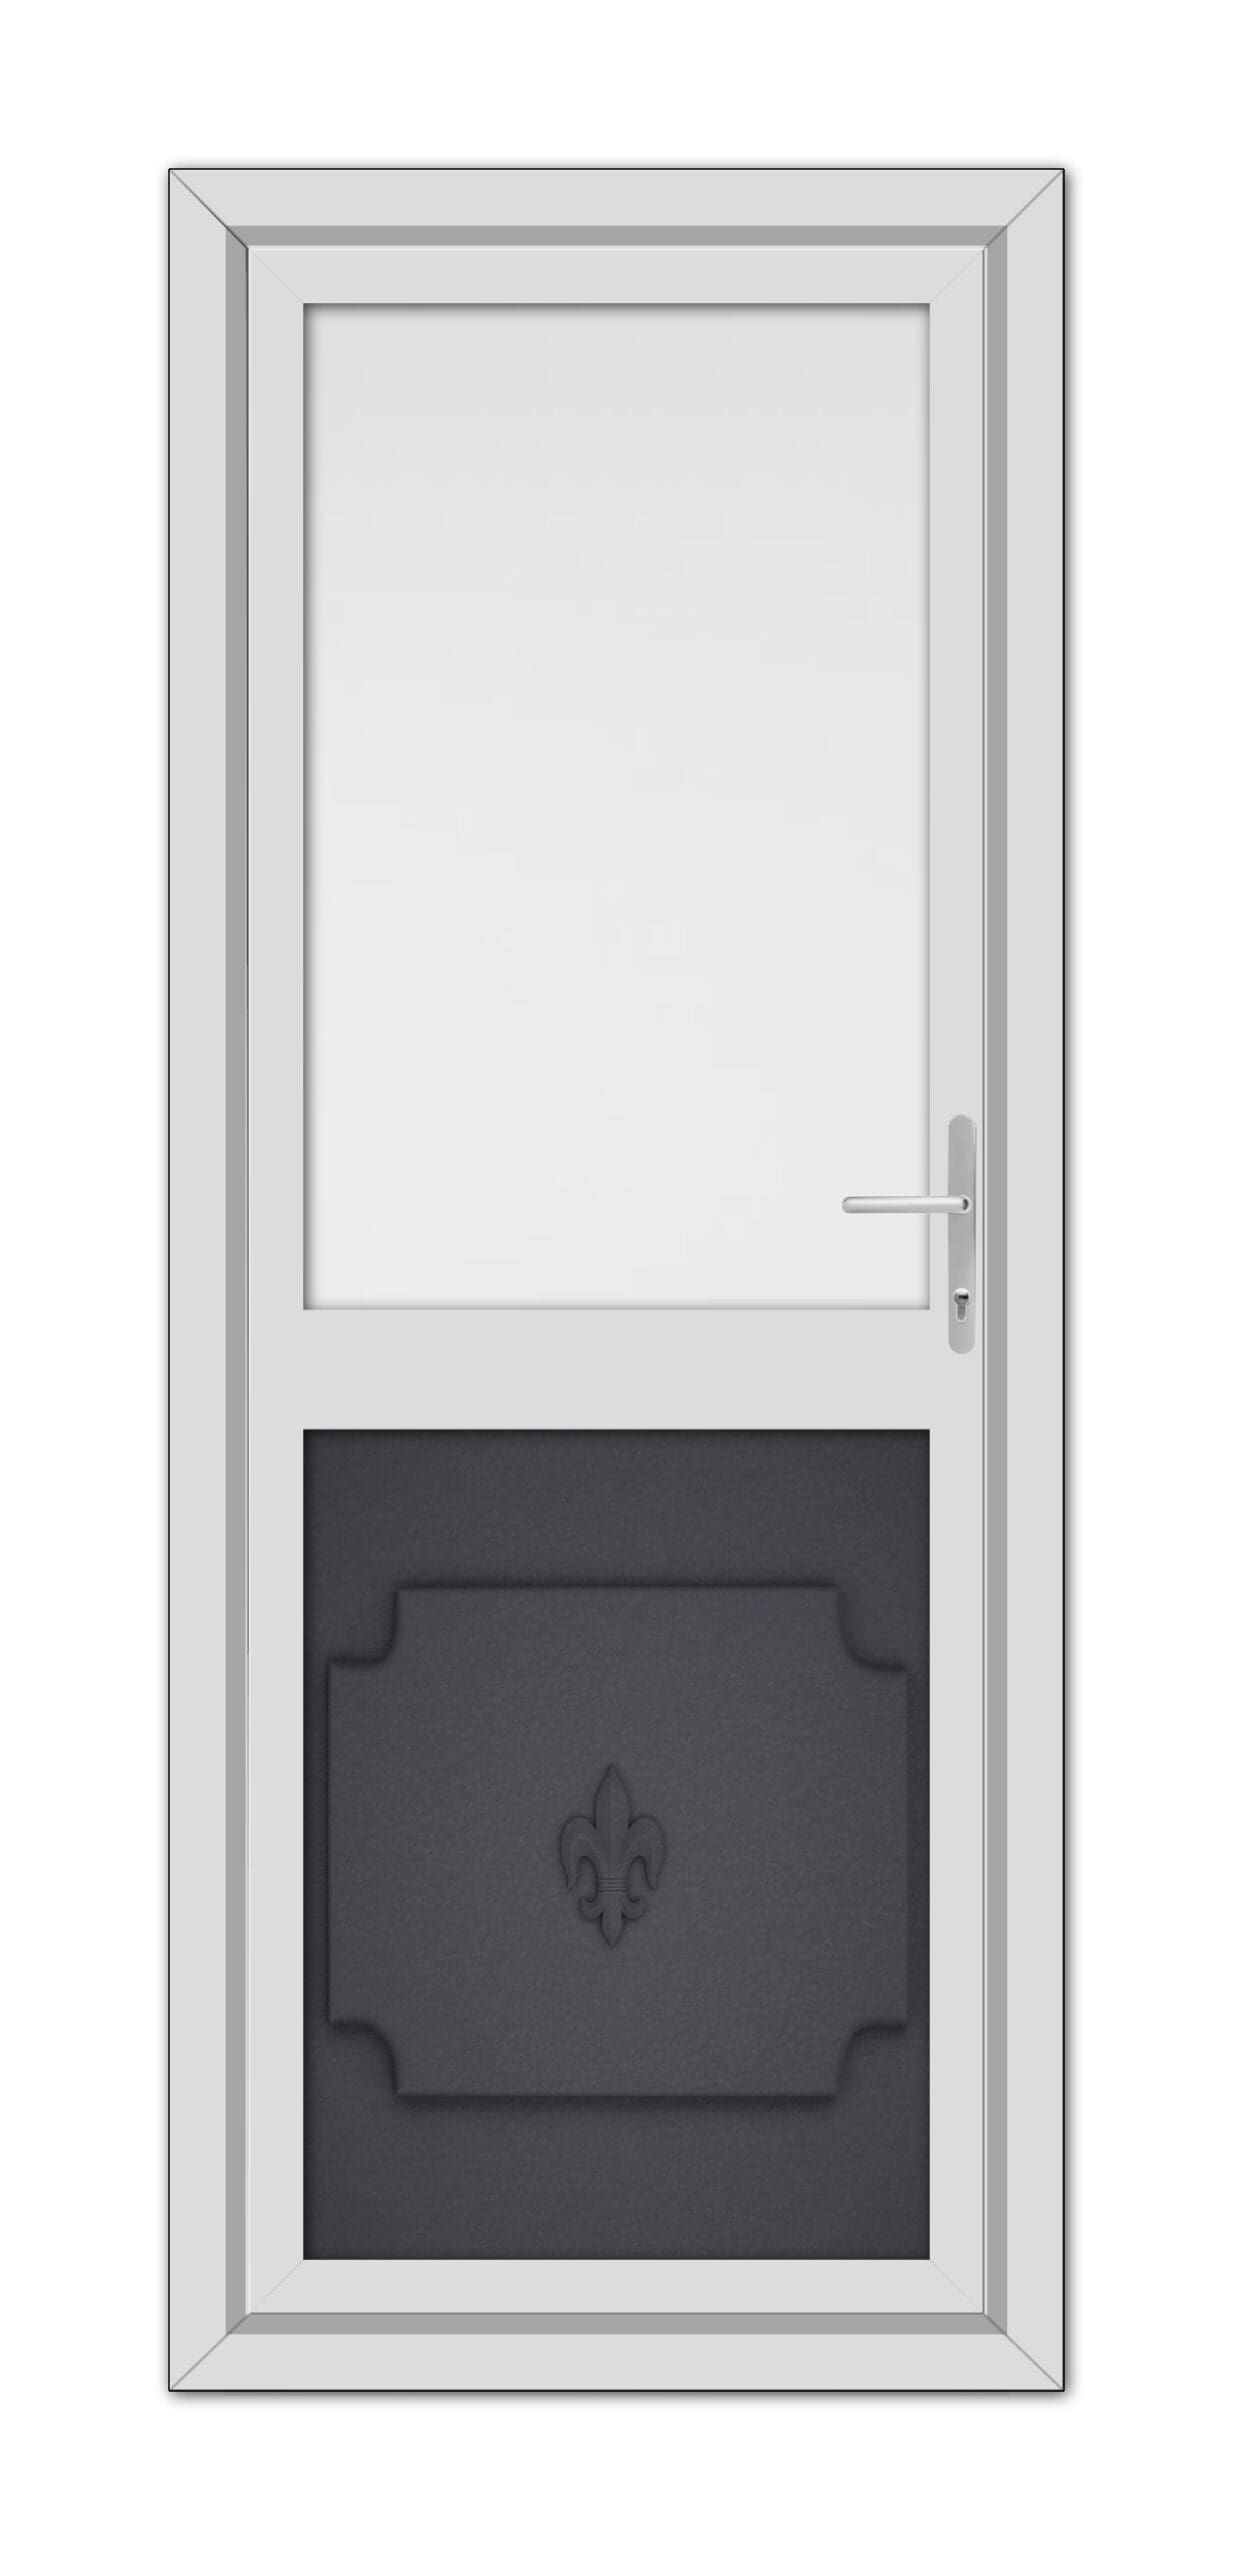 A modern Grey Grained Abbey Half uPVC Back Door with a top glass panel and a decorative lower panel featuring a fleur-de-lis design, complete with a silver handle.